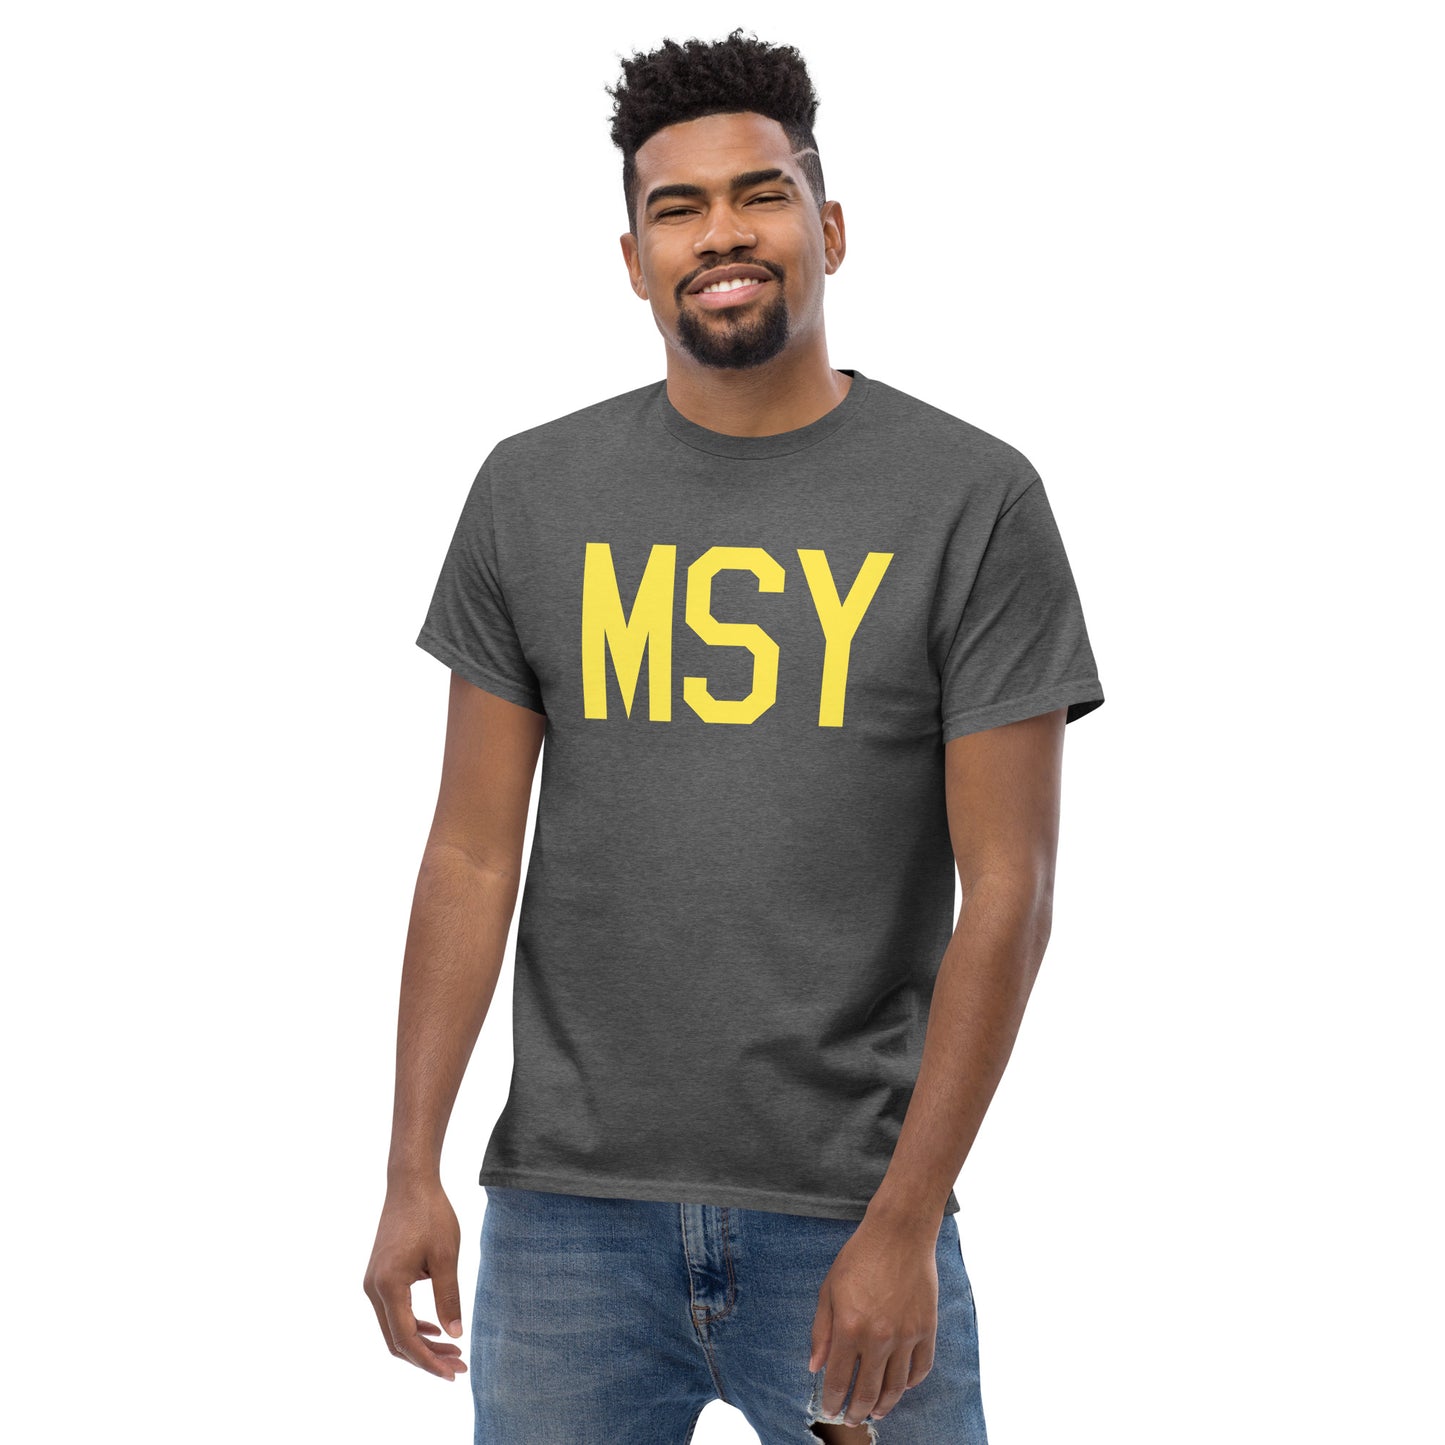 Aviation-Theme Men's T-Shirt - Yellow Graphic • MSY New Orleans • YHM Designs - Image 06